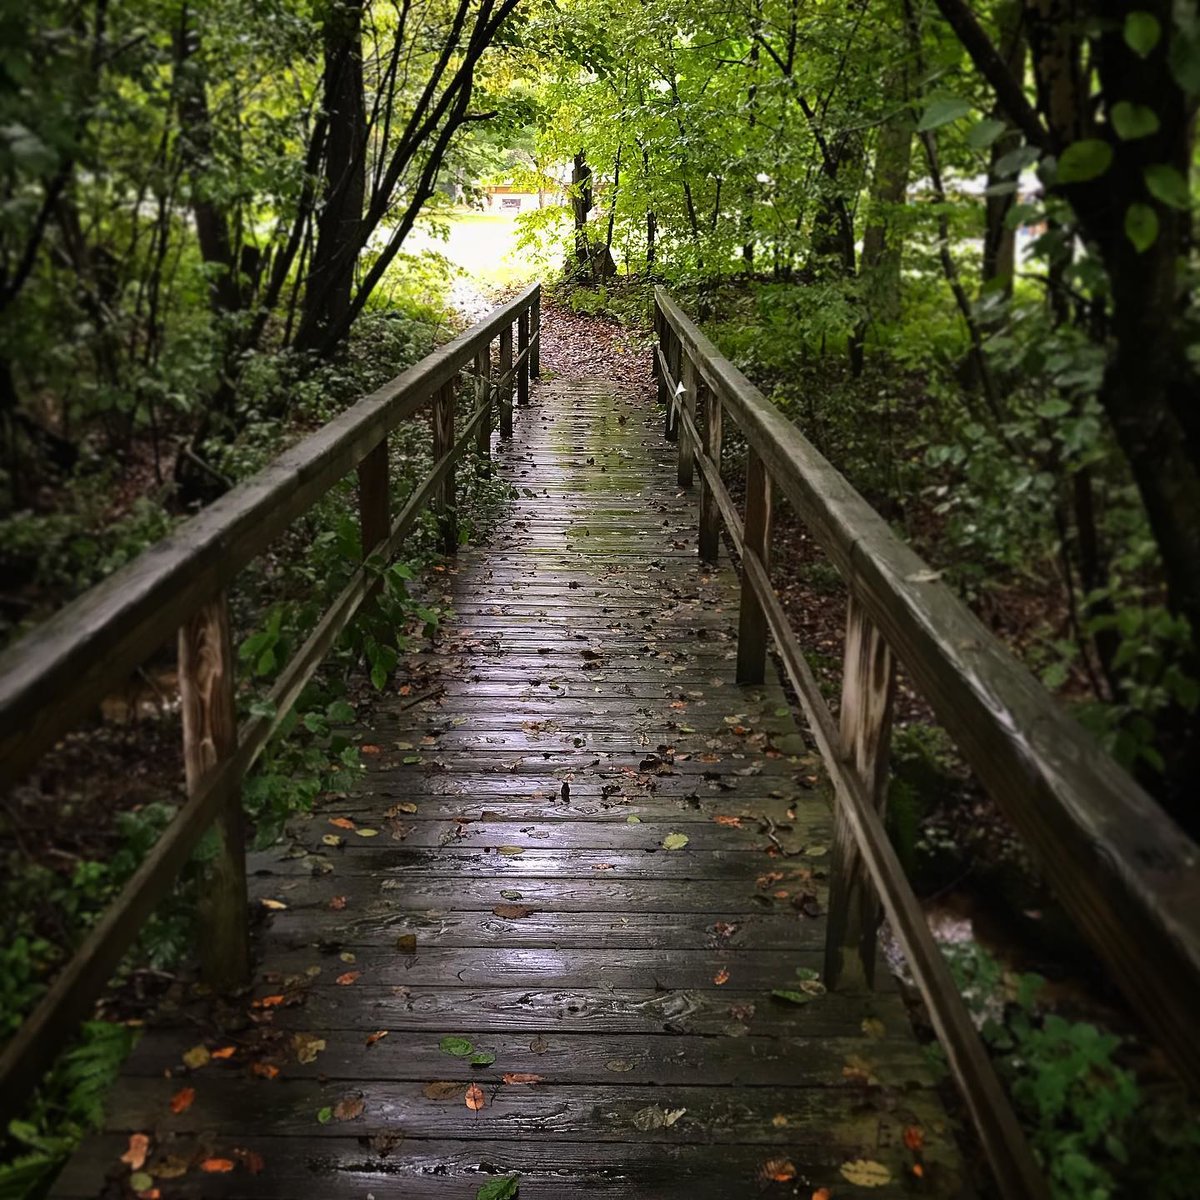 Inspiration on every path at Touchstone Center for Crafts 🏞 @touchstonecraft 

📷: andrewtthornton100 on Instagram